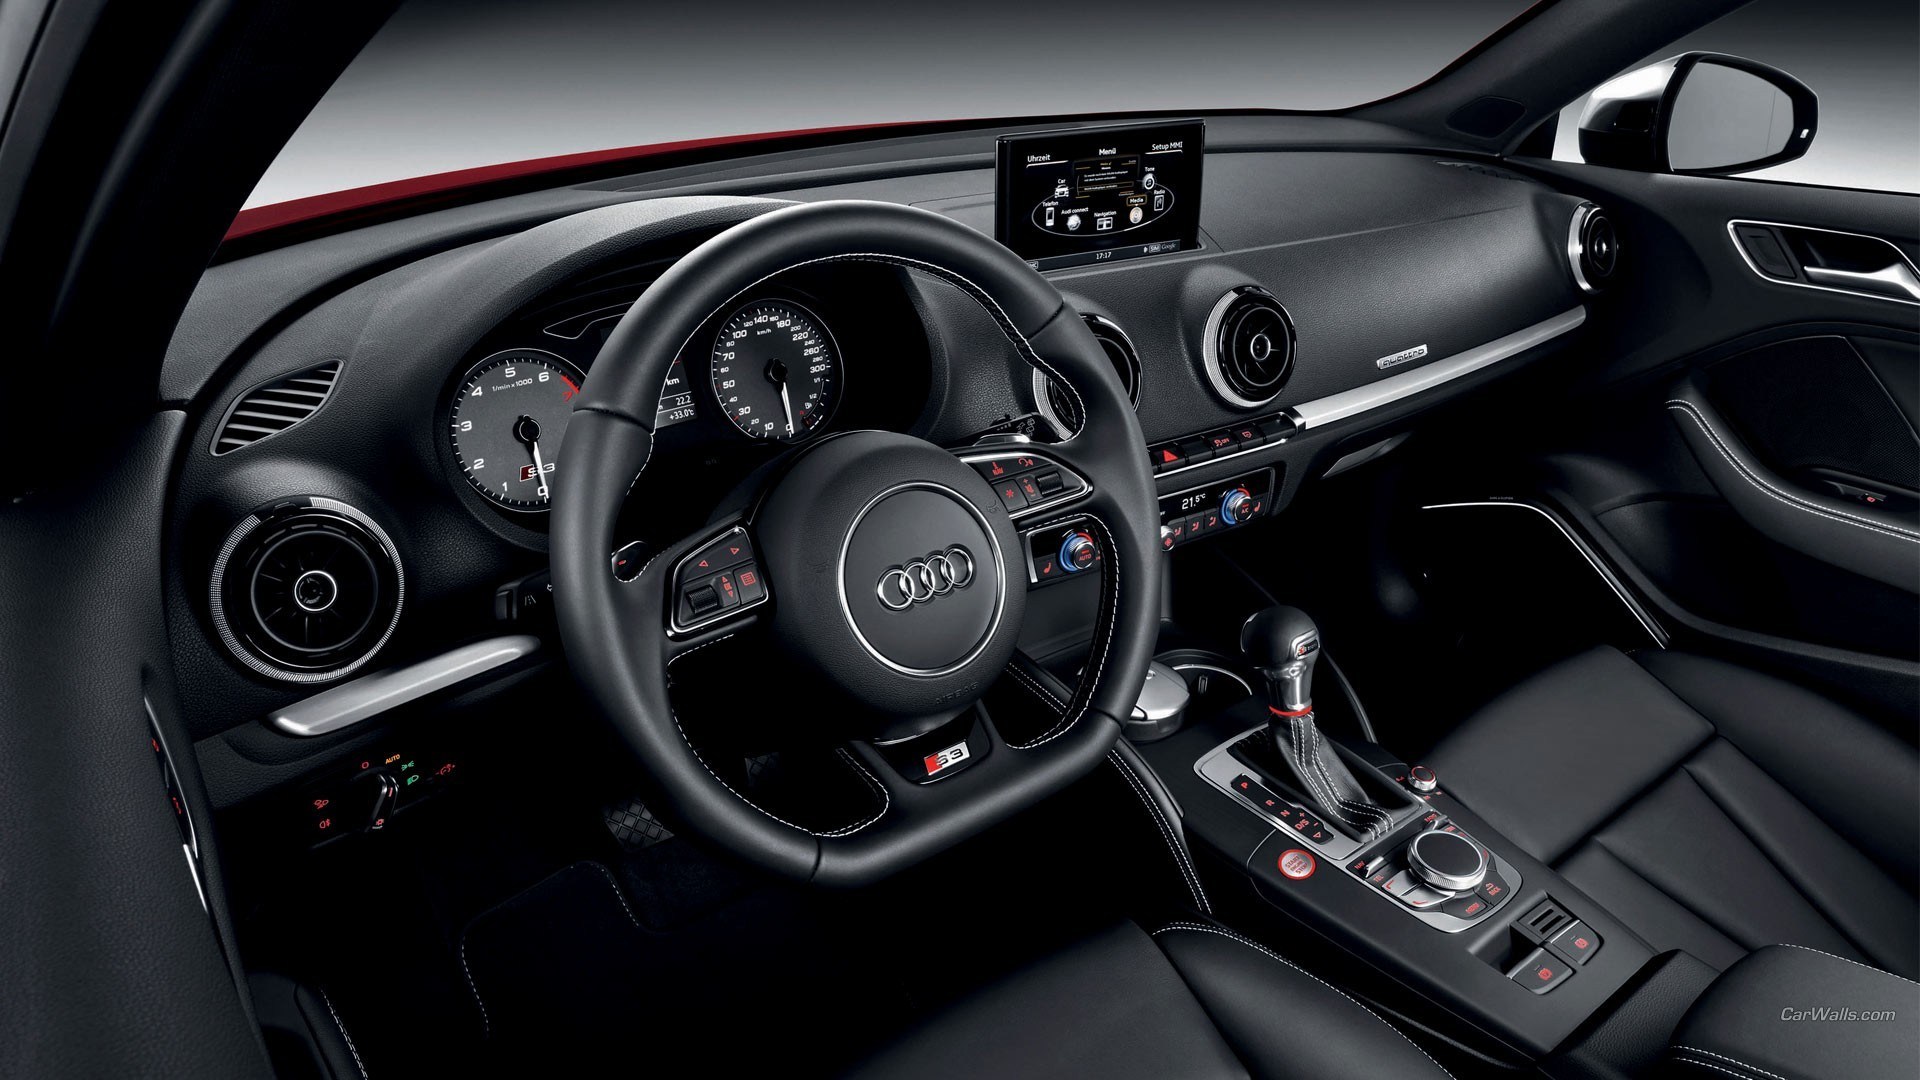 Audi S3 Dashboard Hd Cars 4k Wallpapers Images Backgrounds 1920x1080